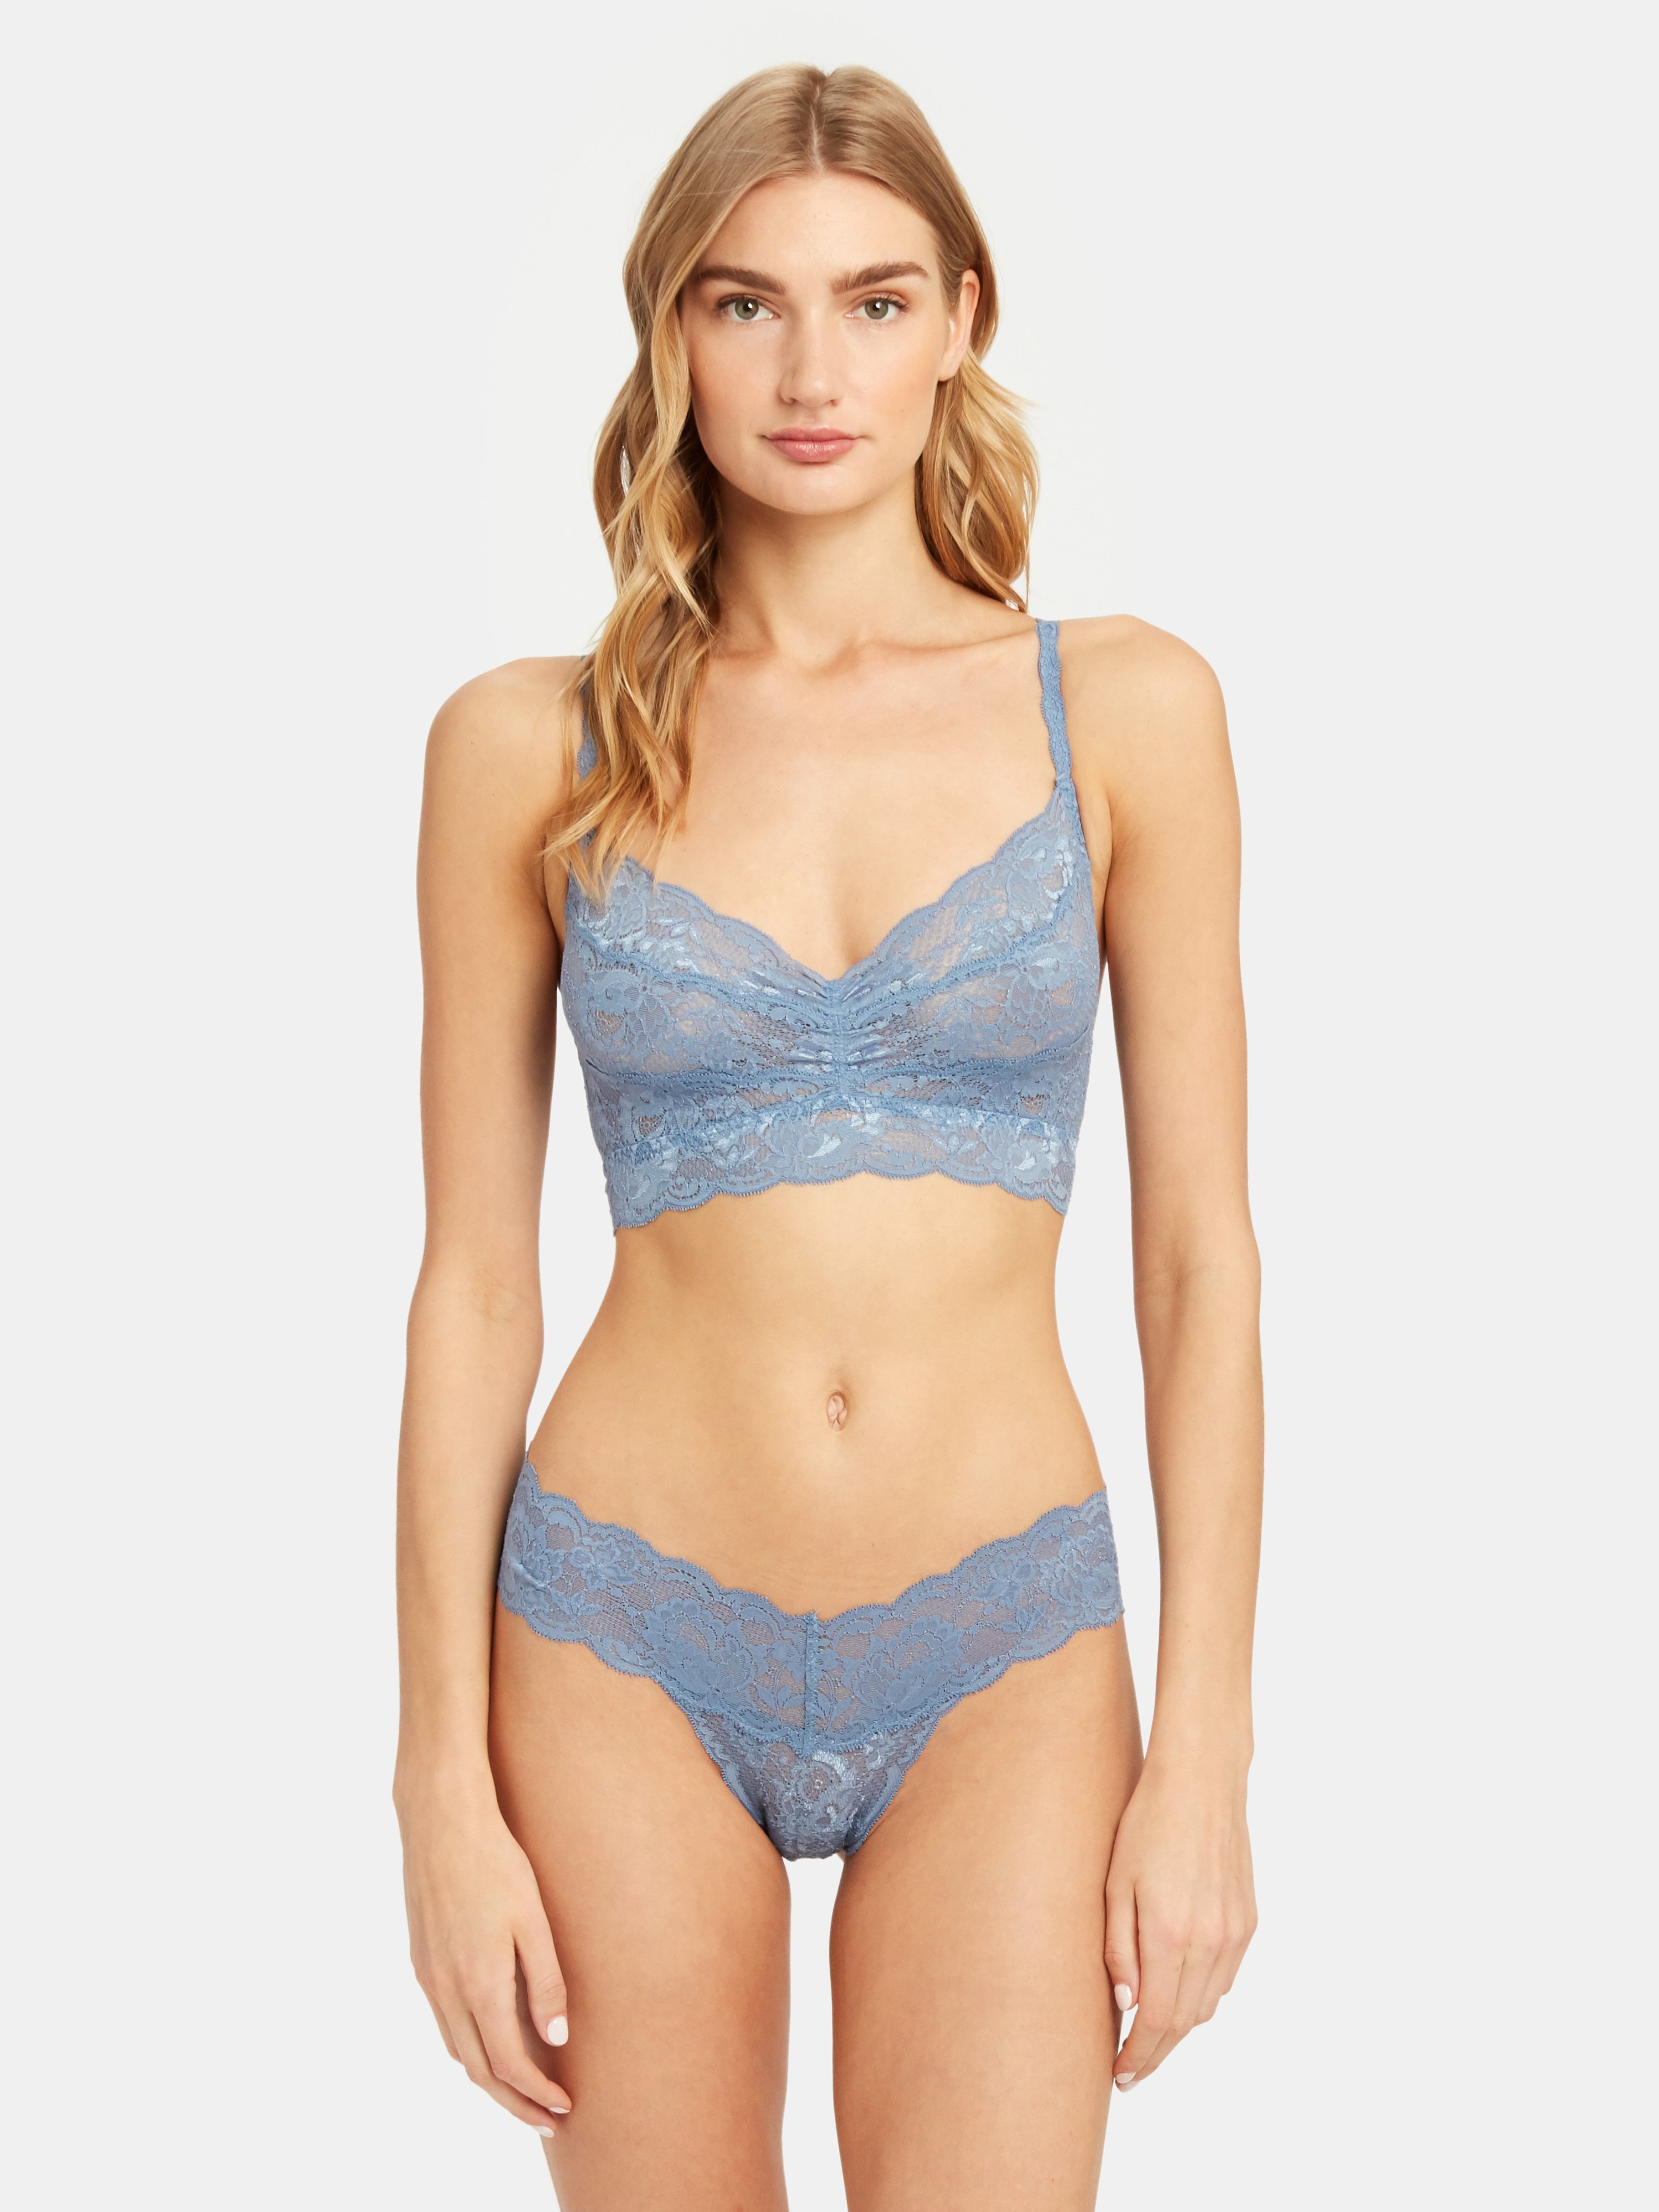 COSABELLA COSABELLA NEVER SAY NEVER SWEETIE SOFT LACE BRALETTE